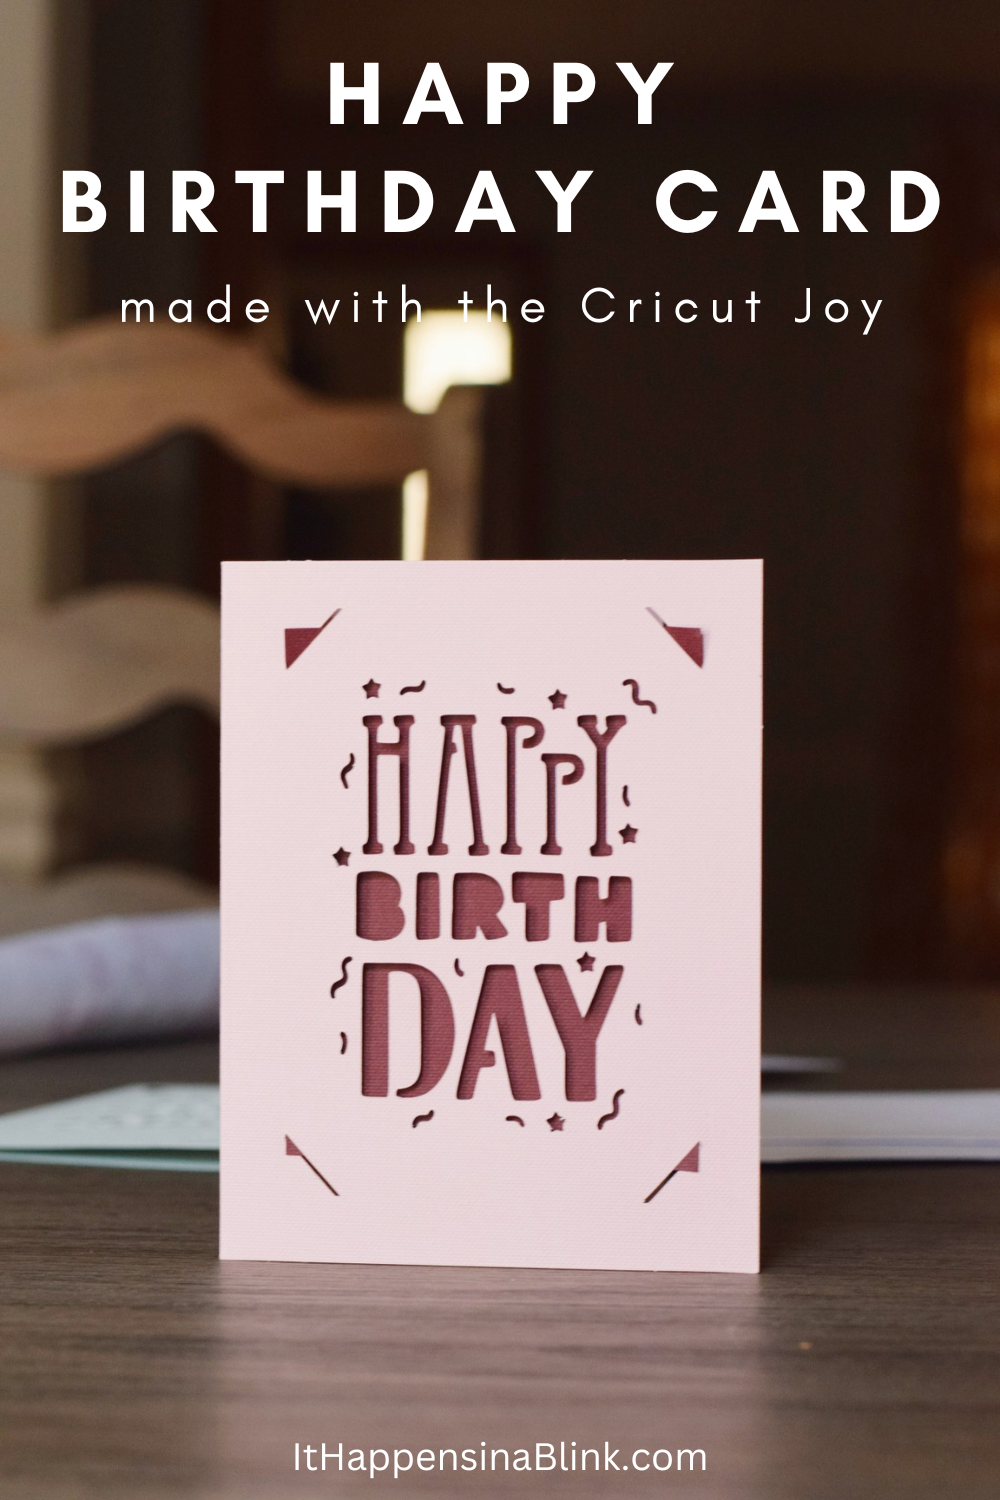 Customizable birthday images for April: Celebrate with joy